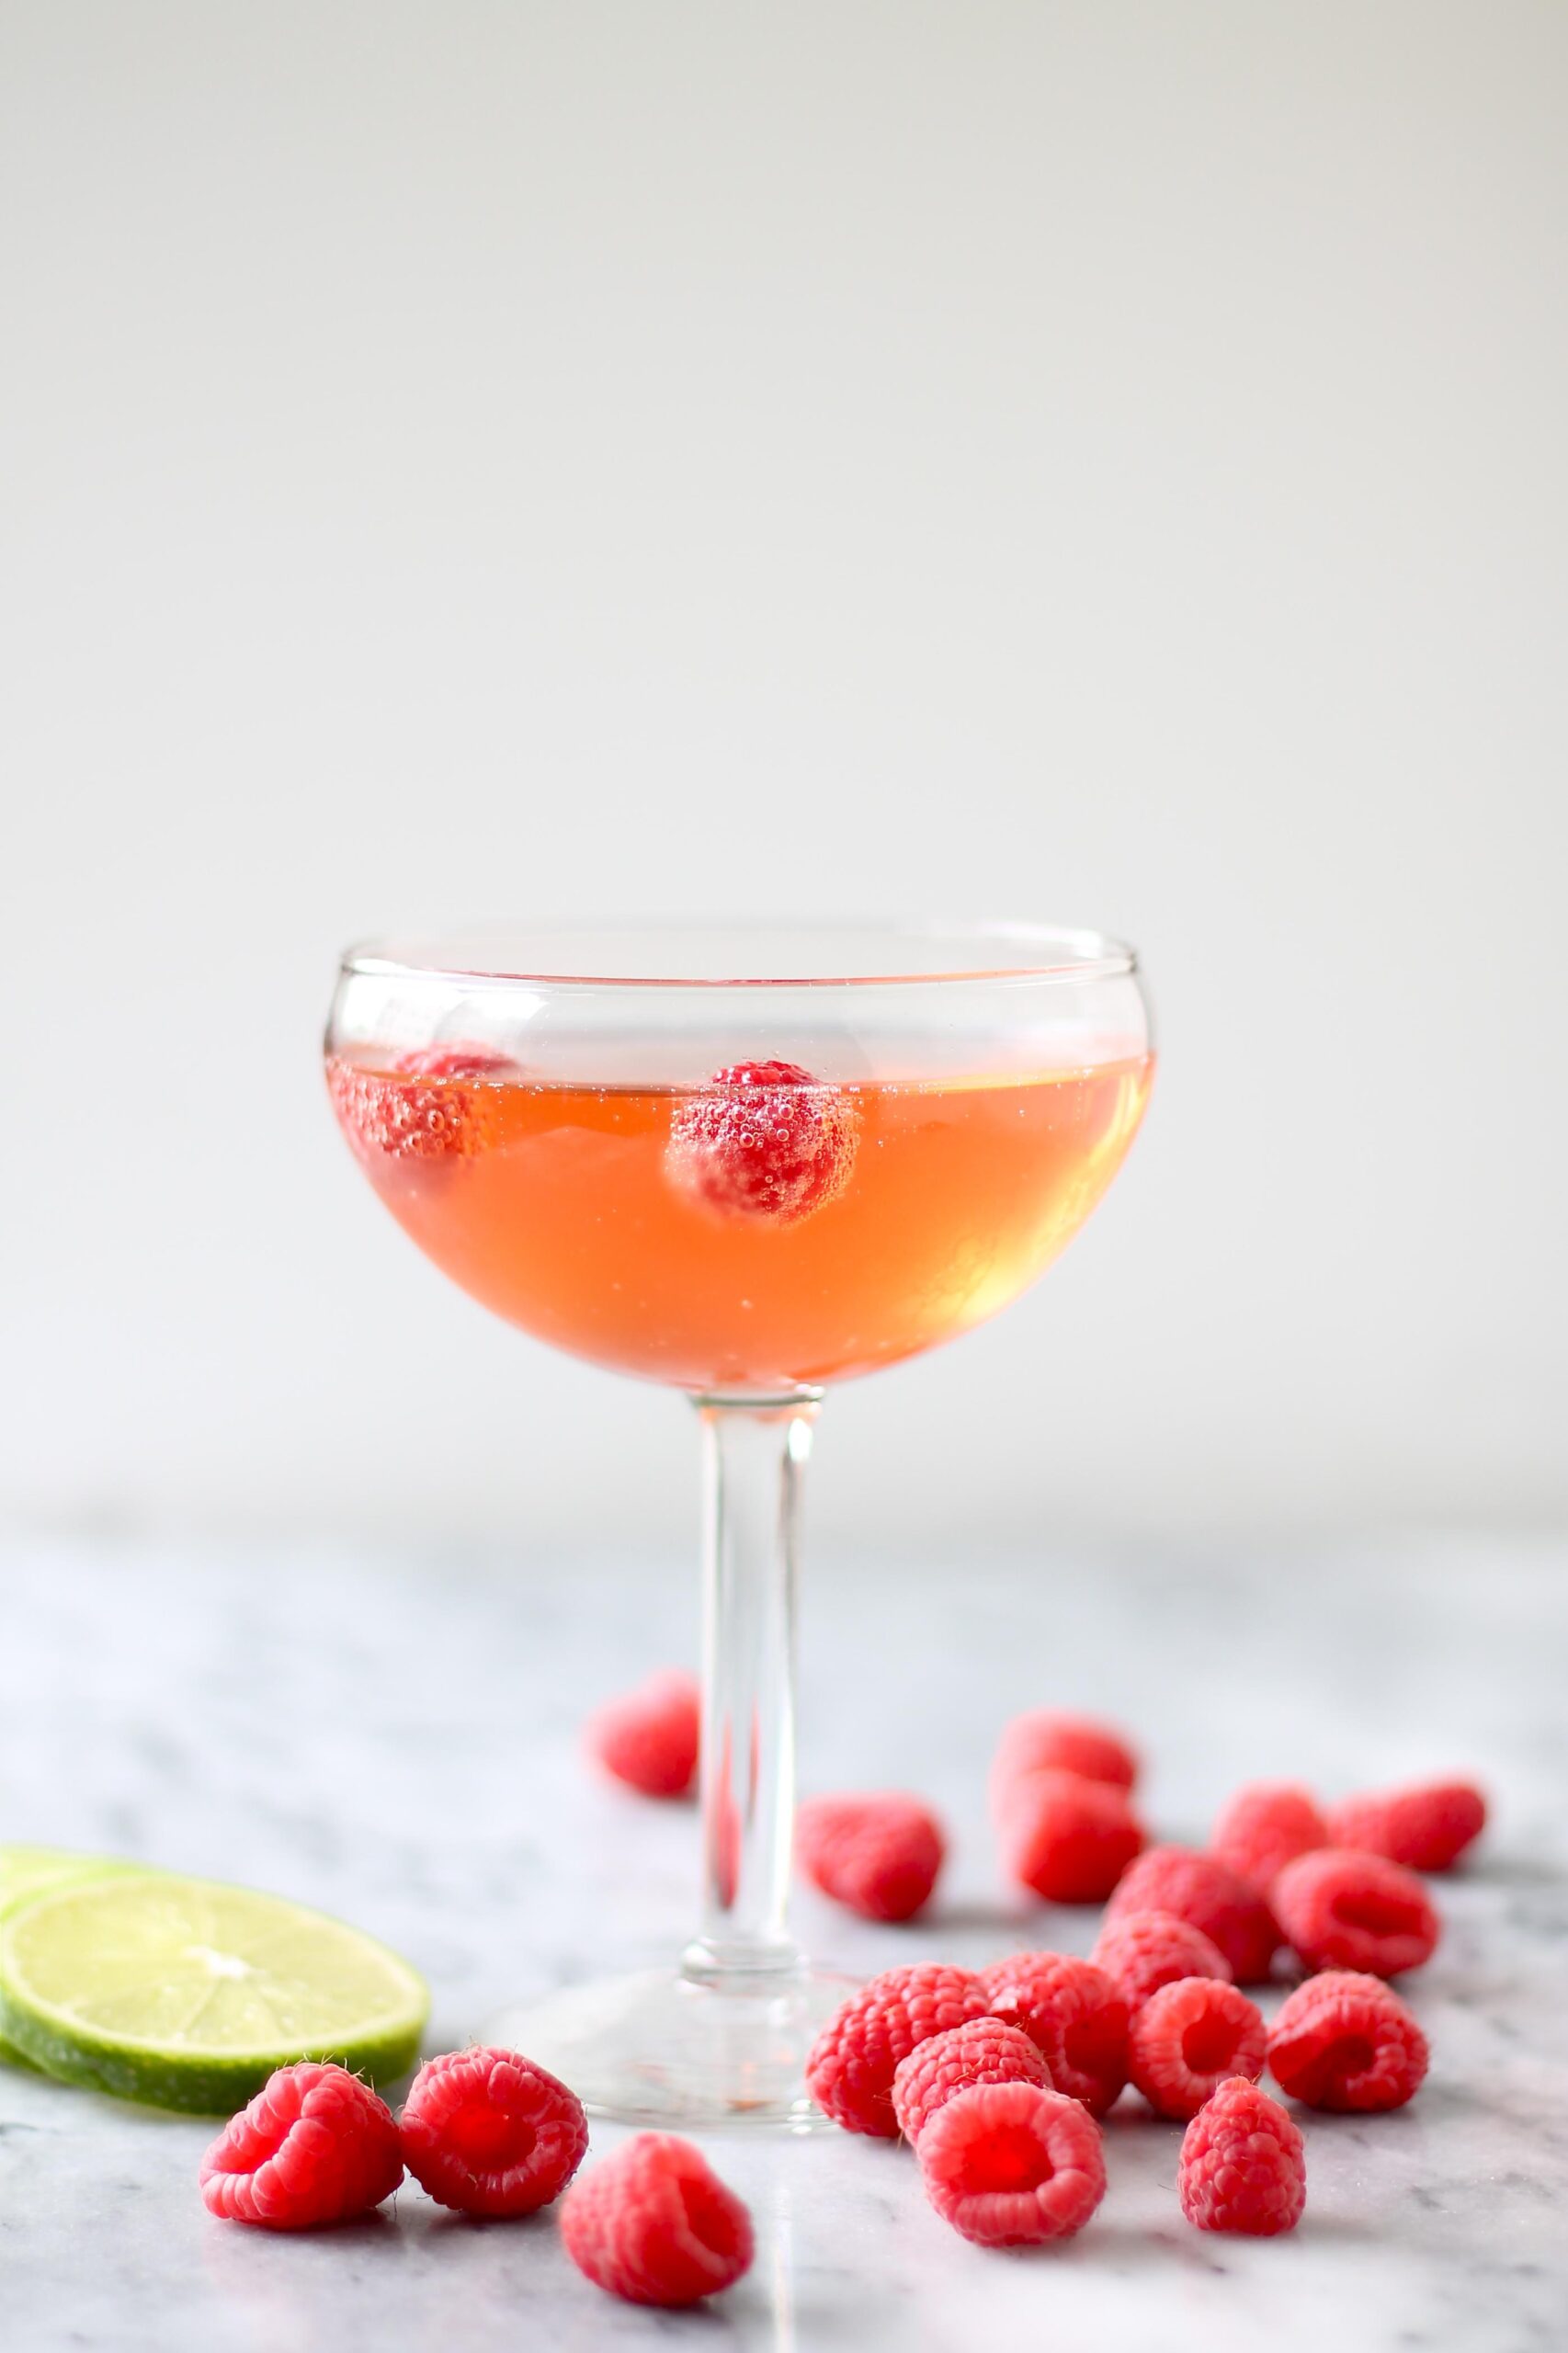  Take a sip and let the flavors of raspberry, beer, and champagne dance on your tongue.